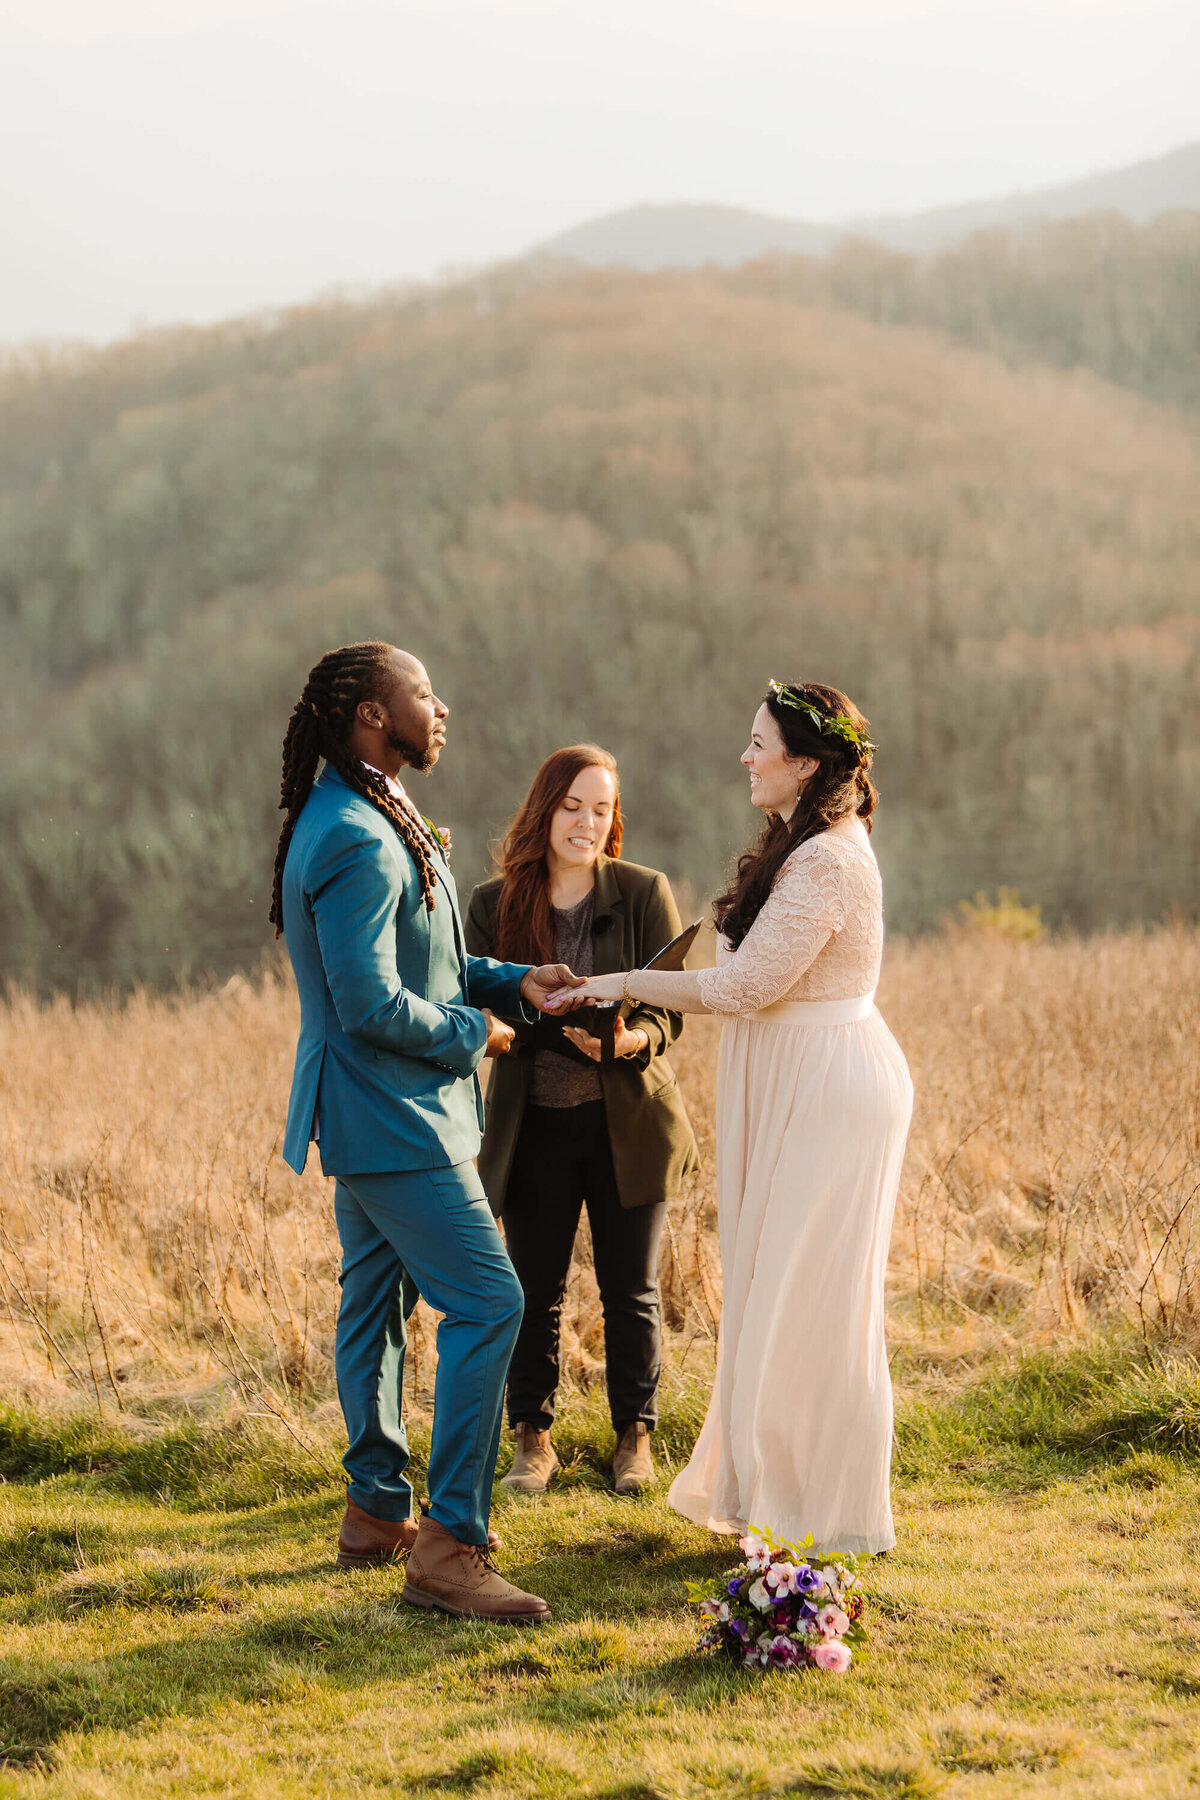 Max-Patch-Sunset-Mountain-Elopement-34